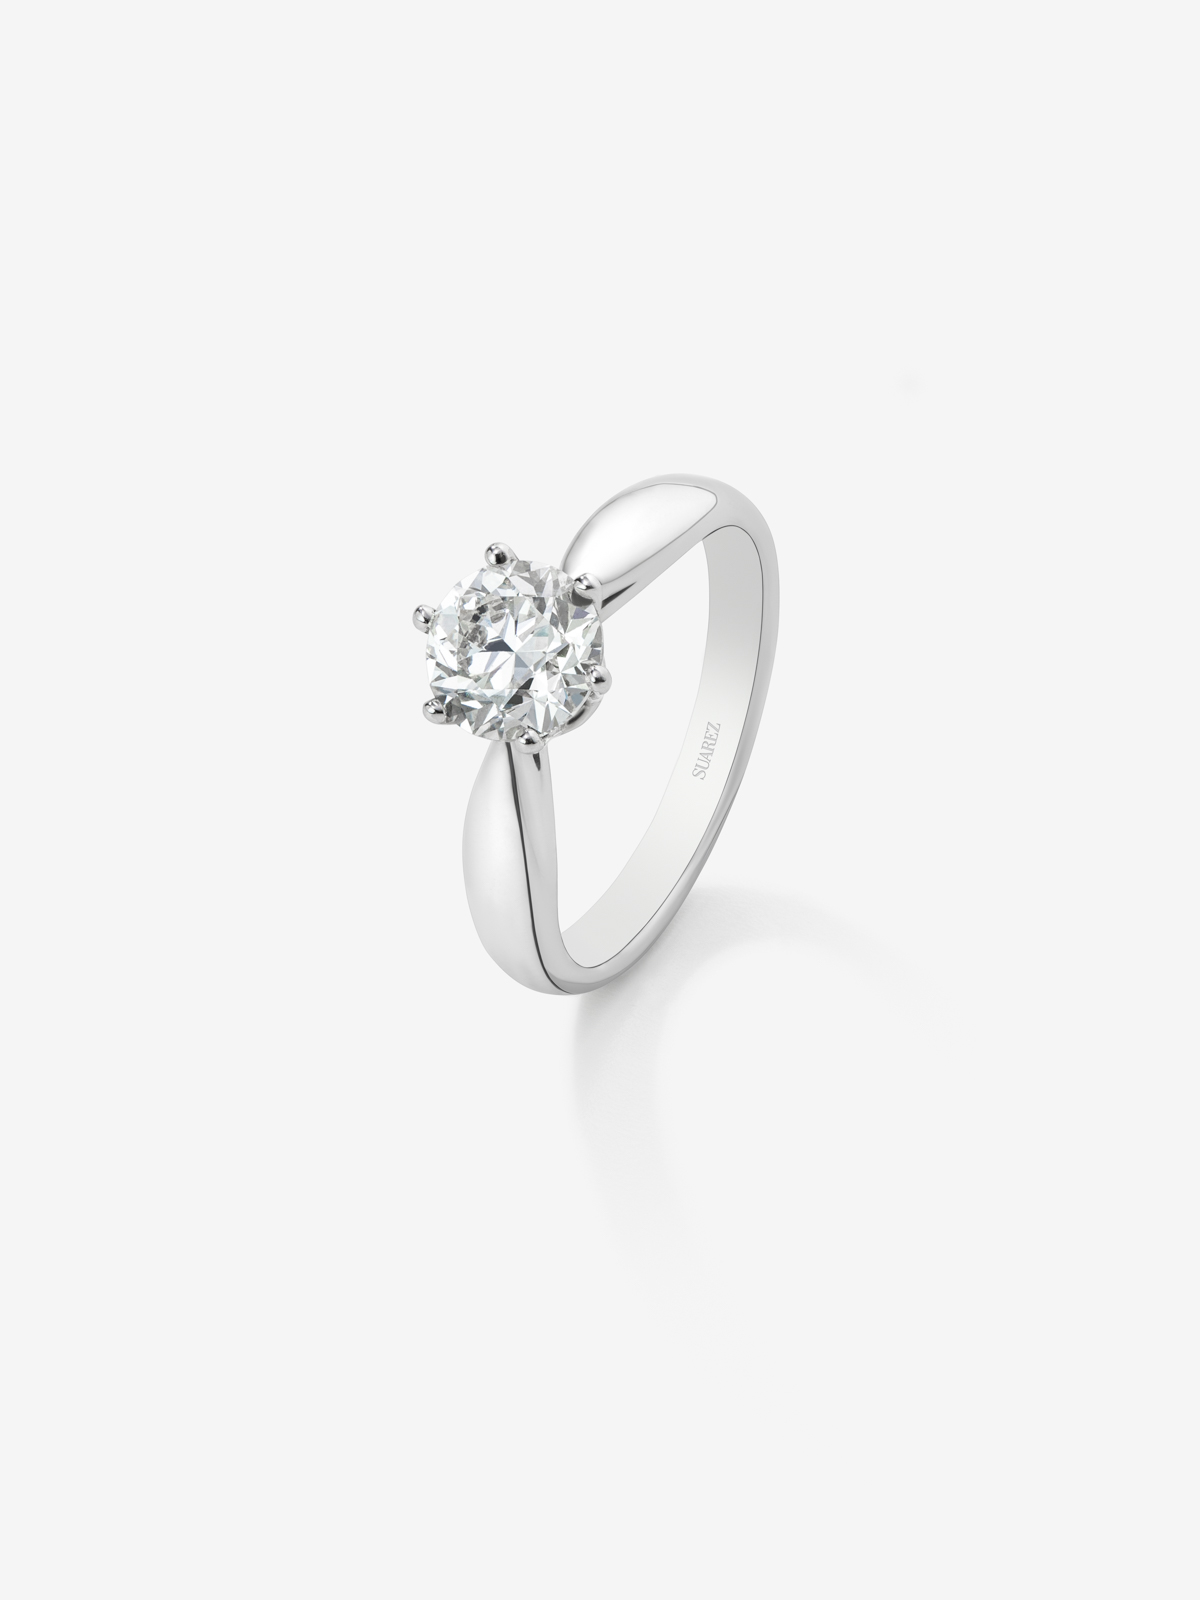 18K white gold compromise ring with 2 carat central diamond